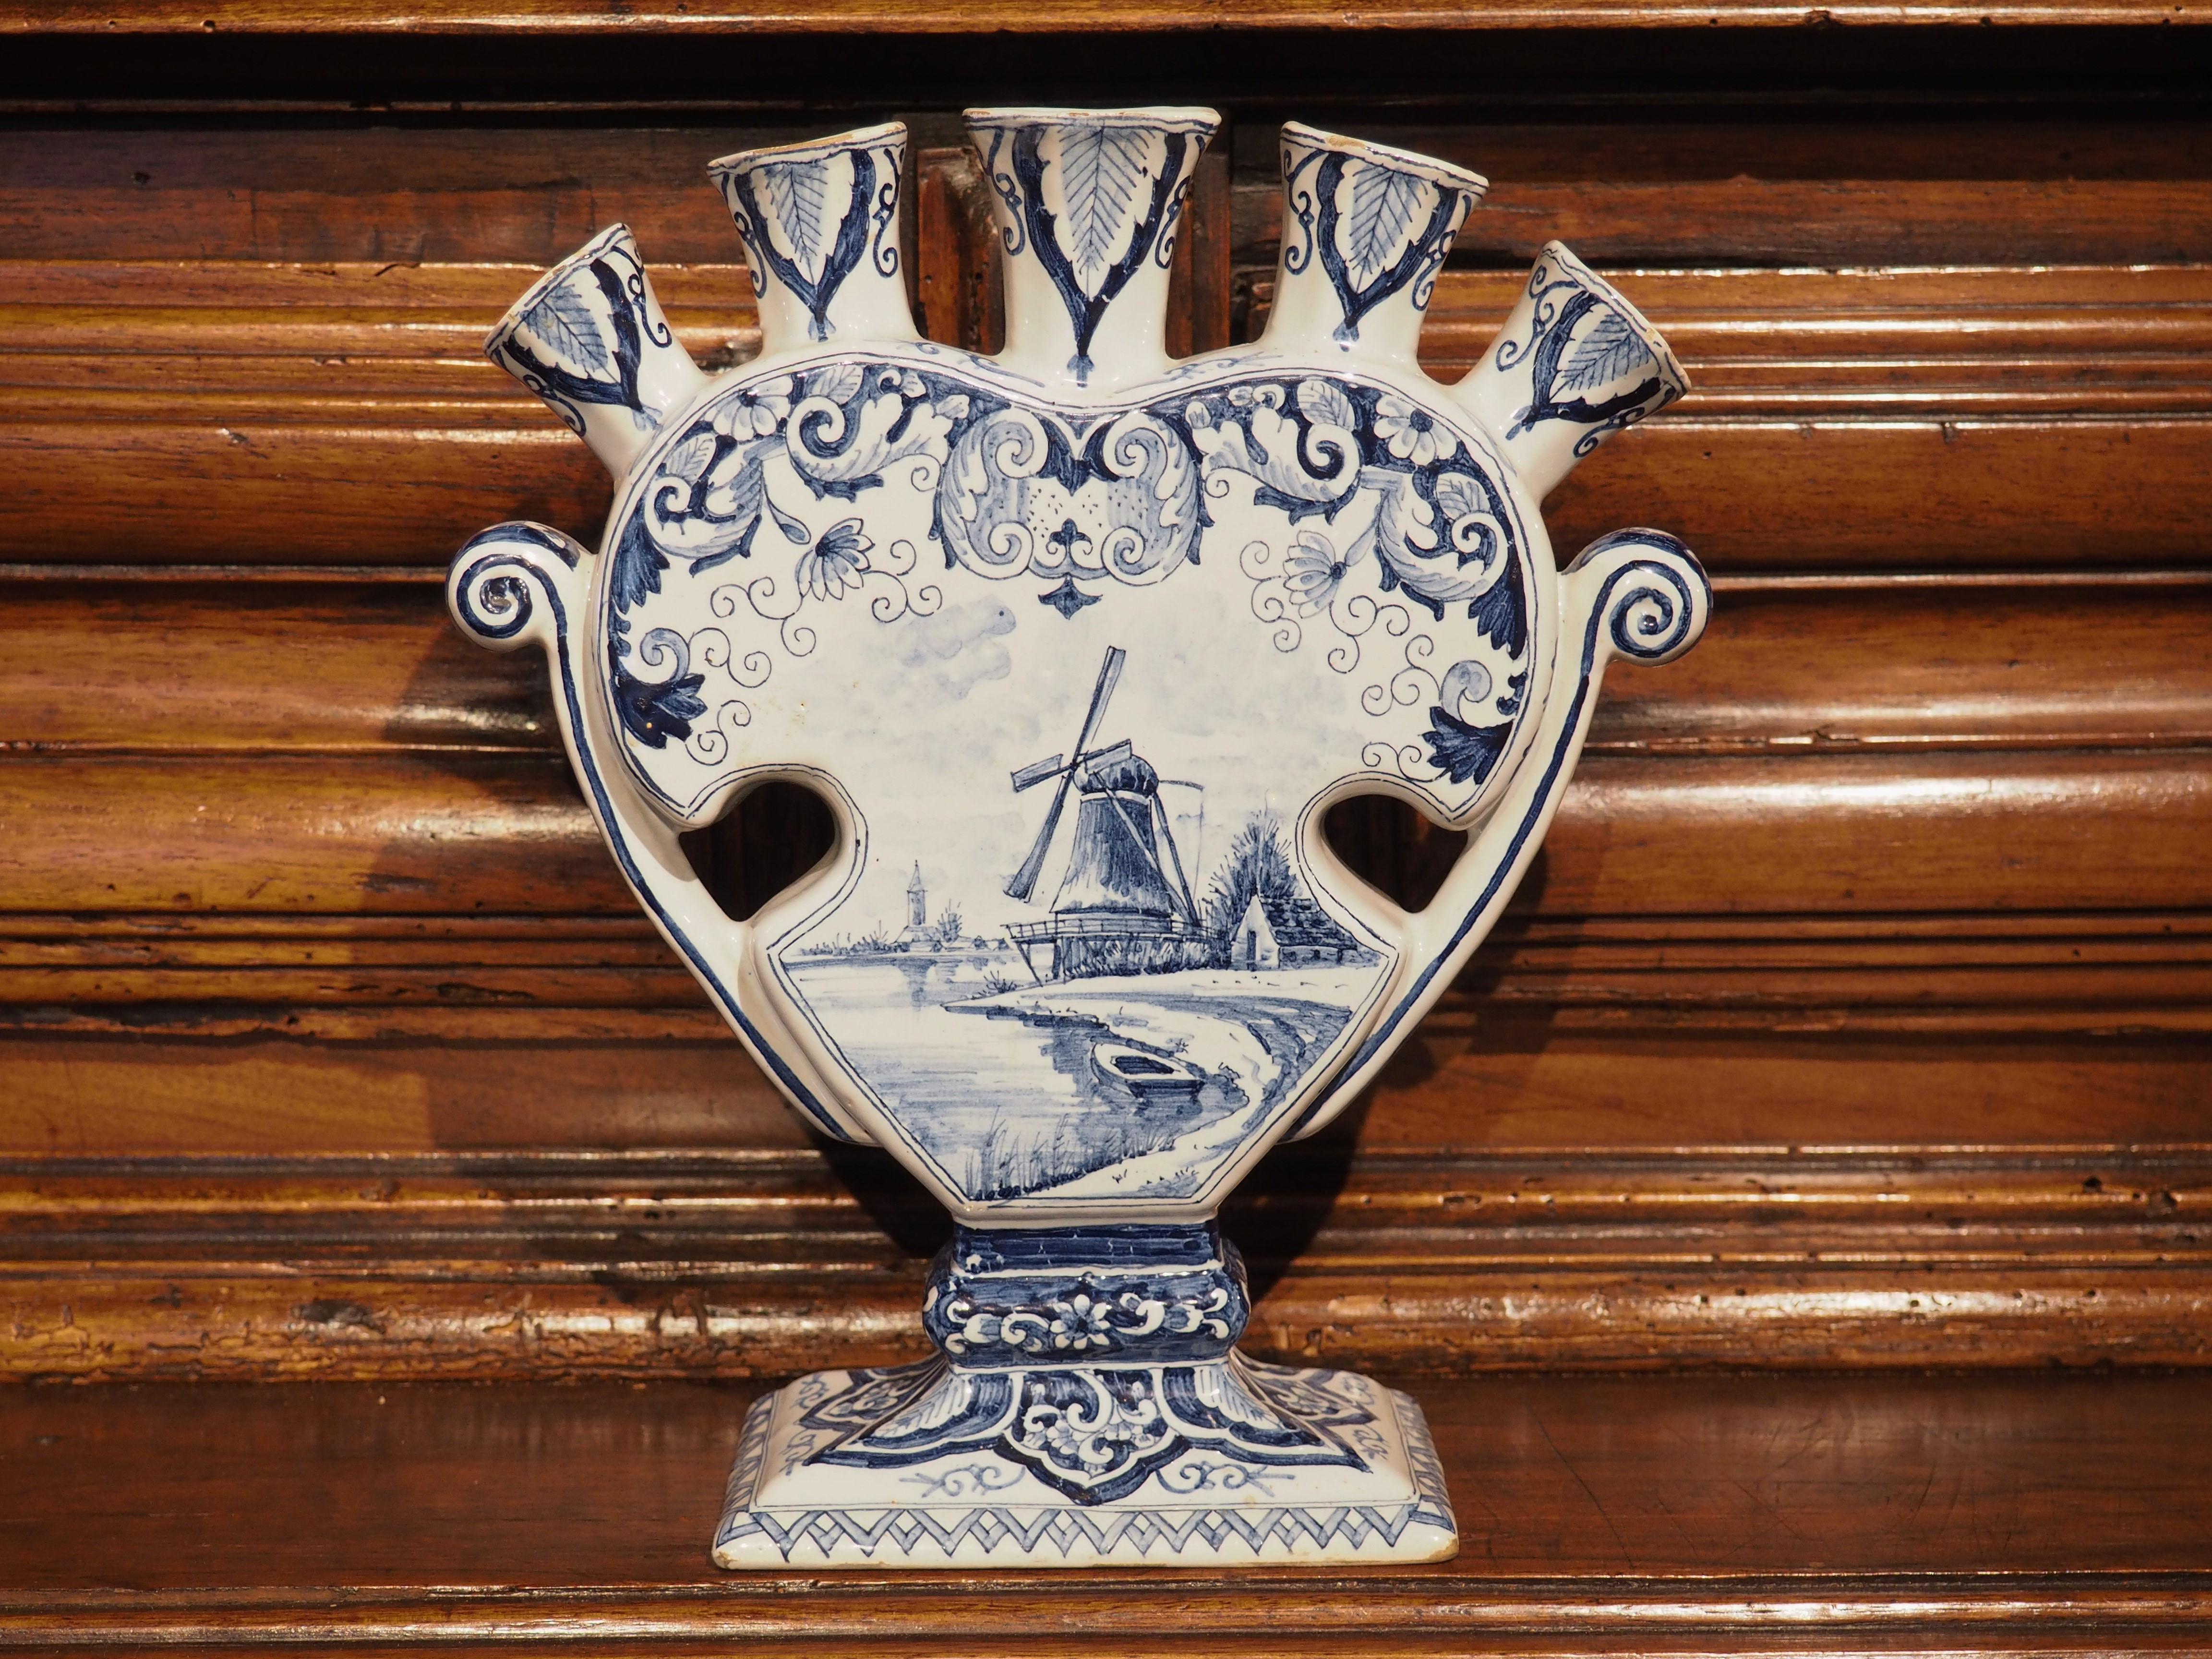 This blue and white Delftware urn is known as a tulip vase, as it was designed to hold cut flowers, specifically tulips, which are strongly associated with the Netherlands. The quintal vase (meaning it has five 